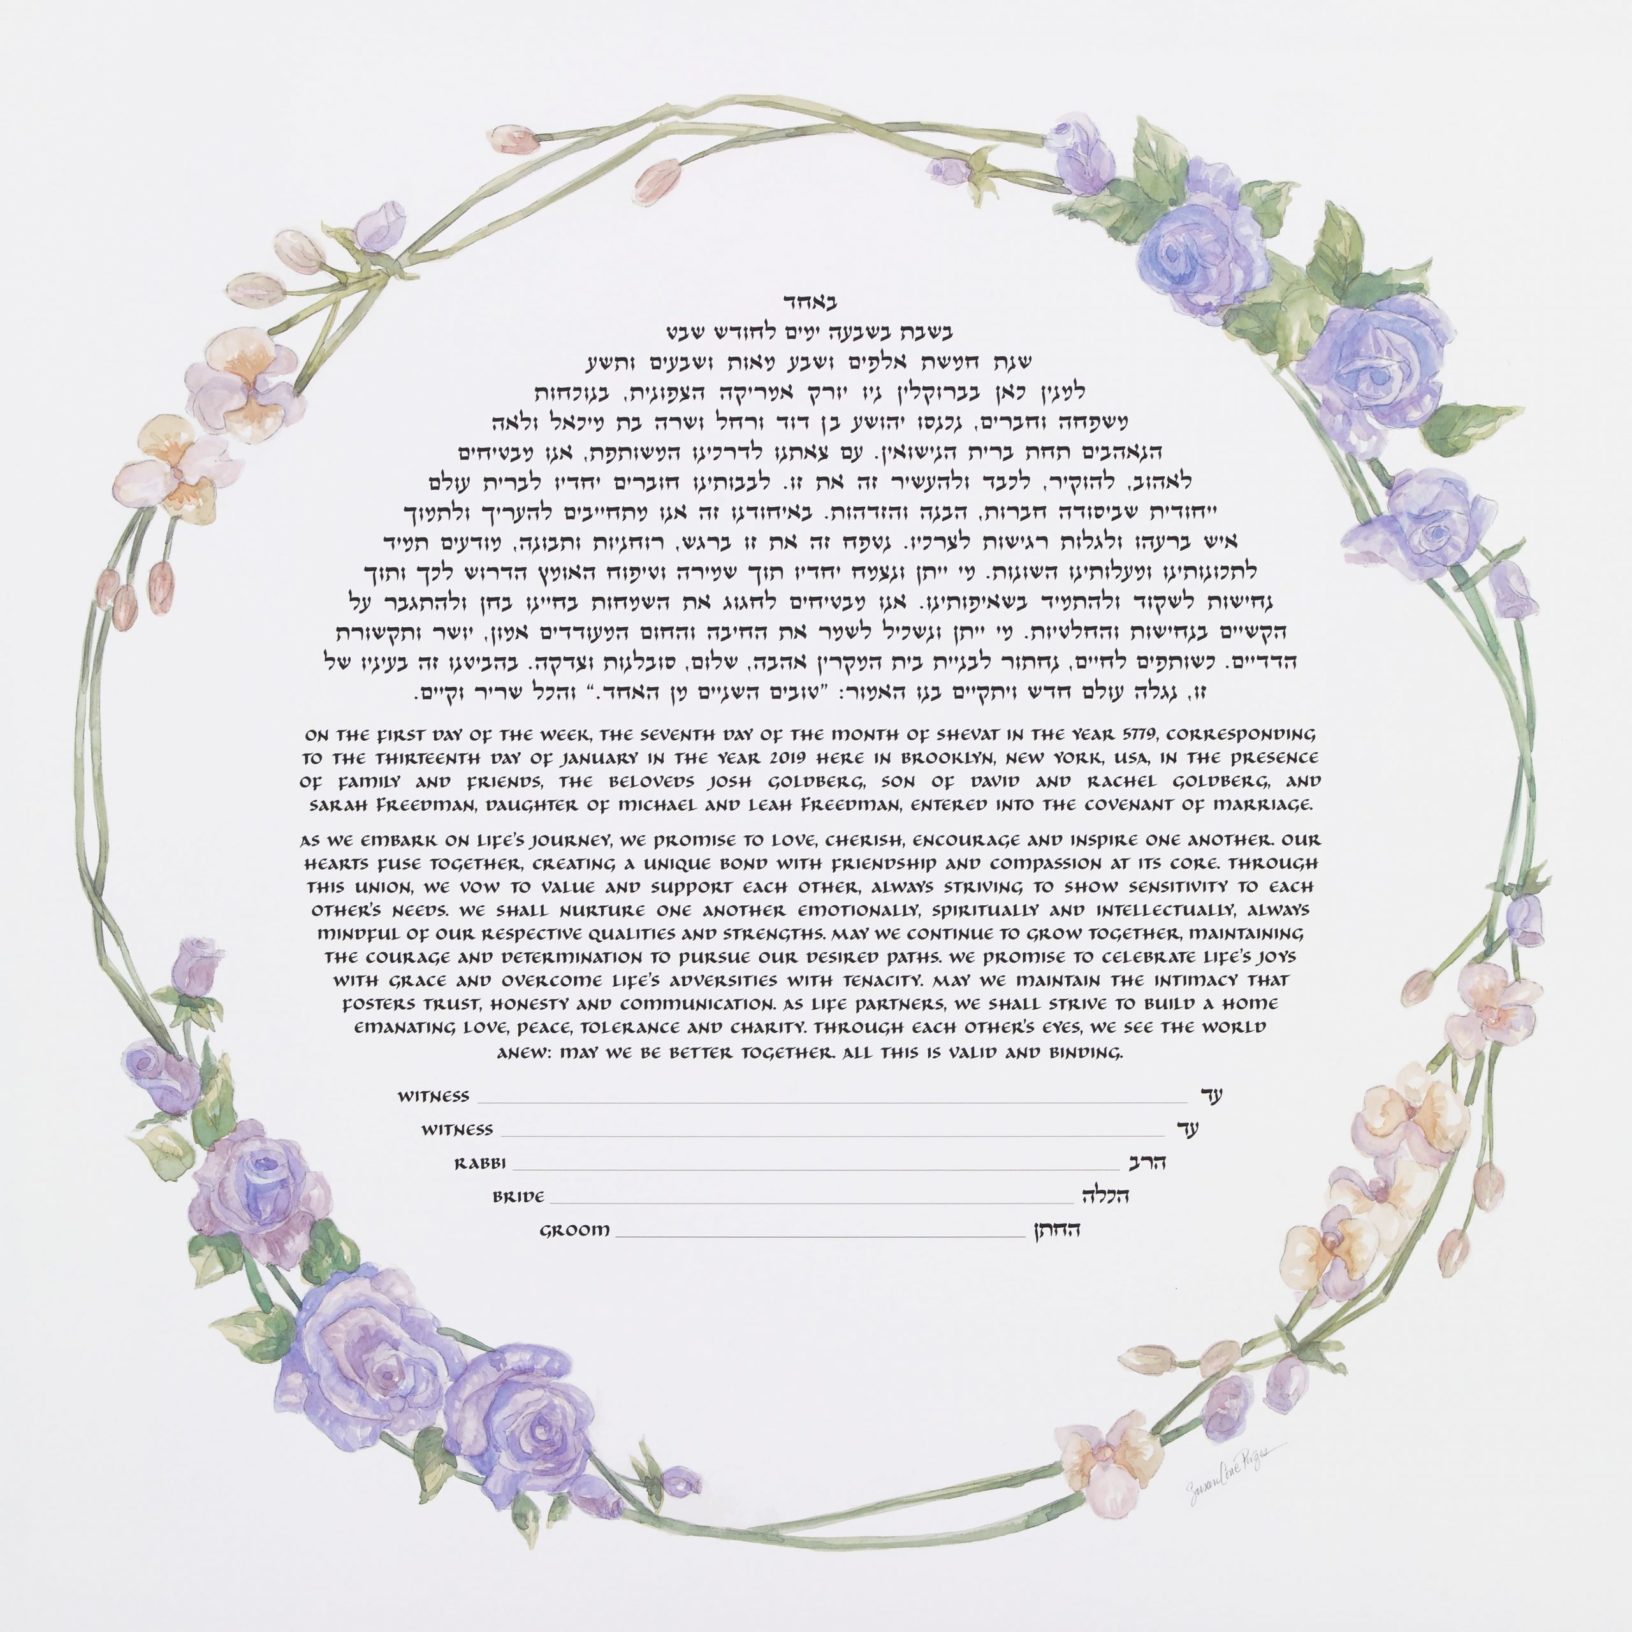 Circle of Vines with Roses and Orchids Ketubah Toronto by Susan Cone Porges